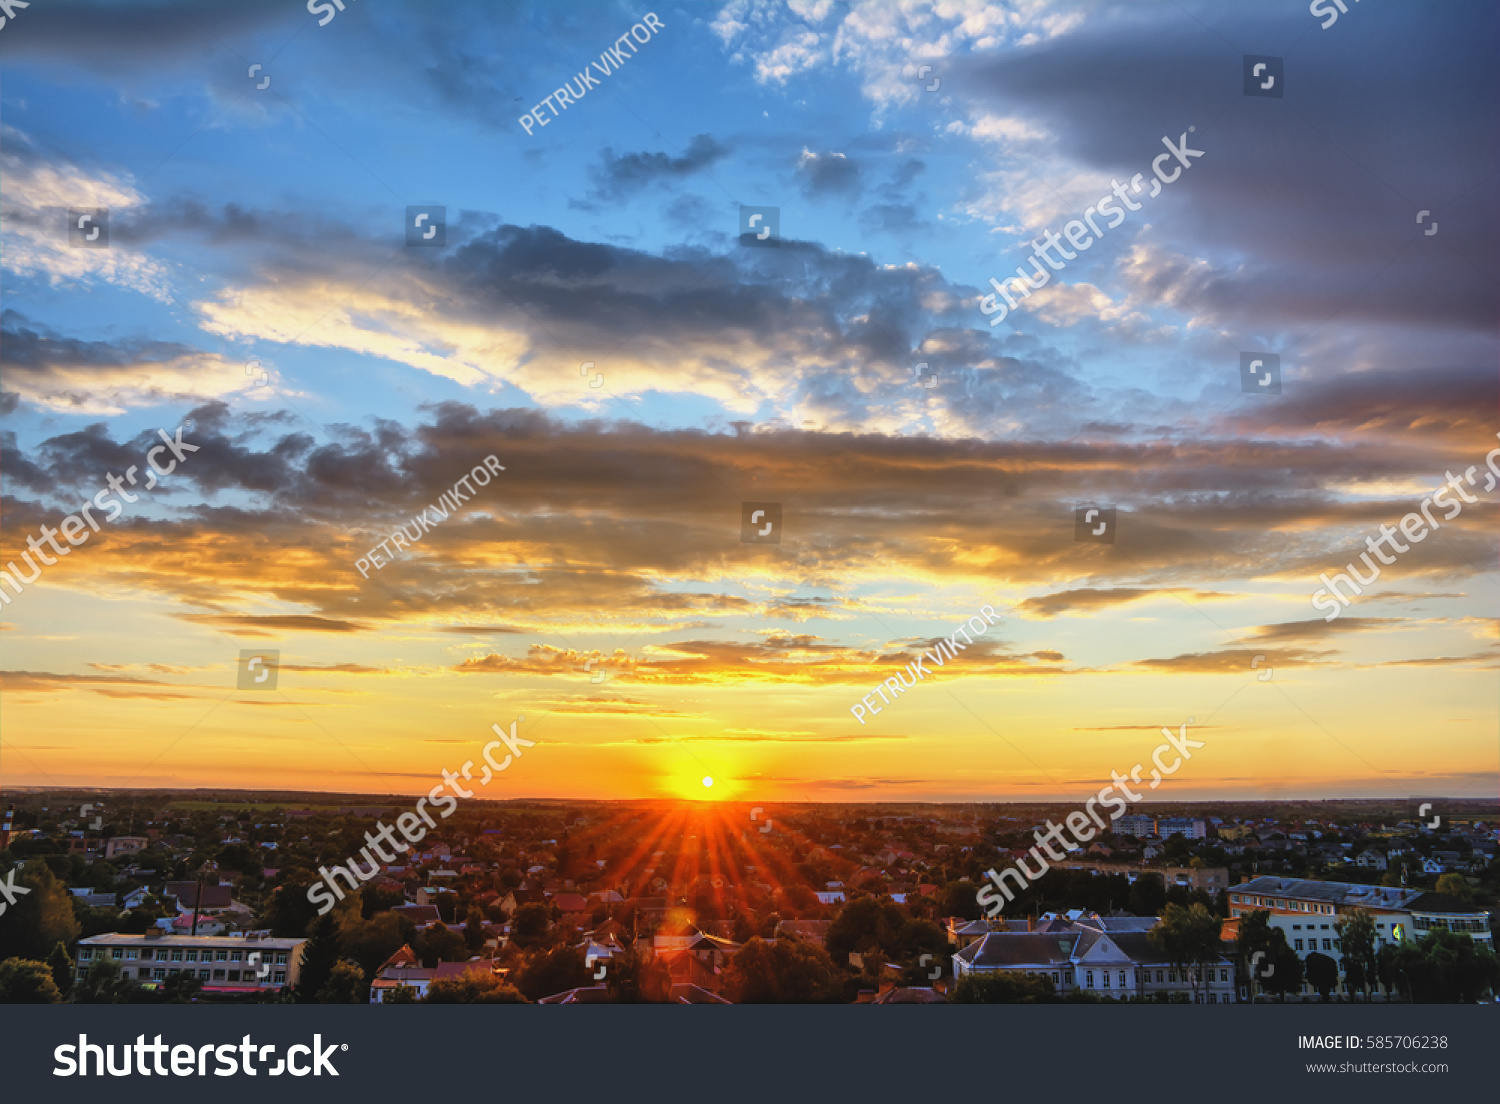 Sky and clouds at sunset over evening city. #585706238